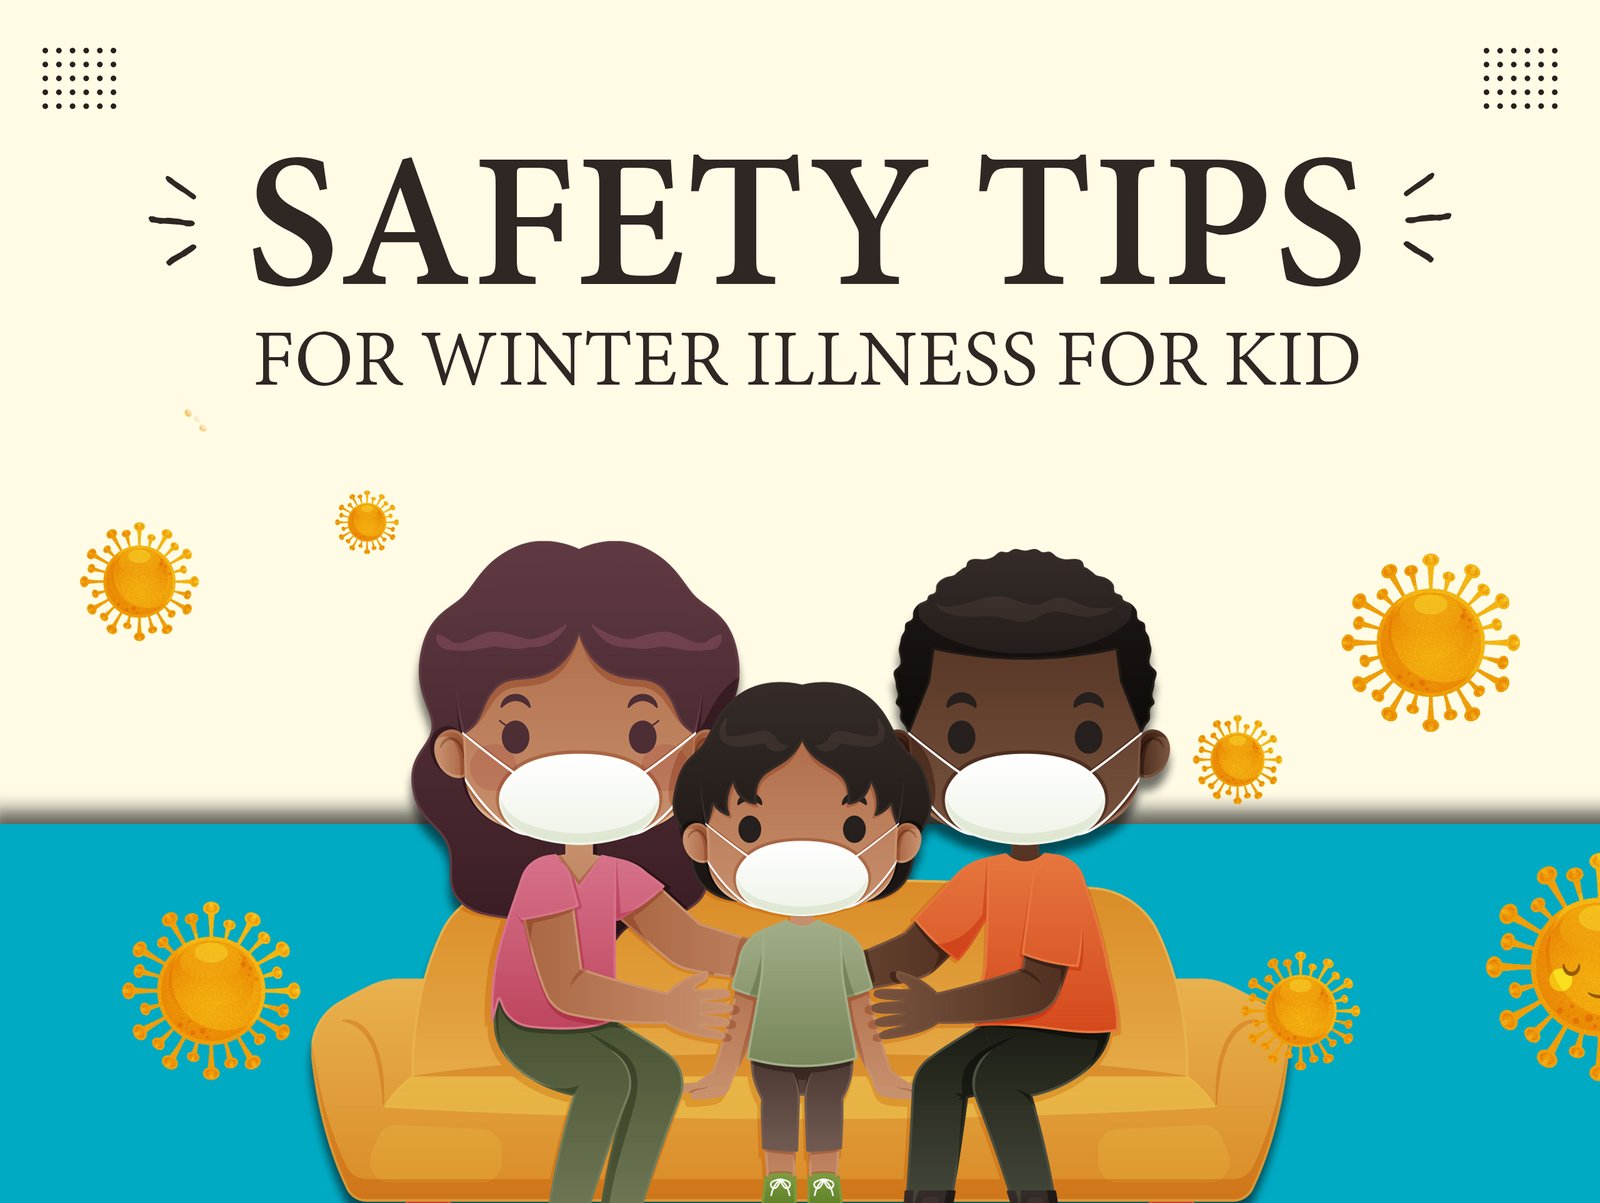 Safety tips for winter illness poster